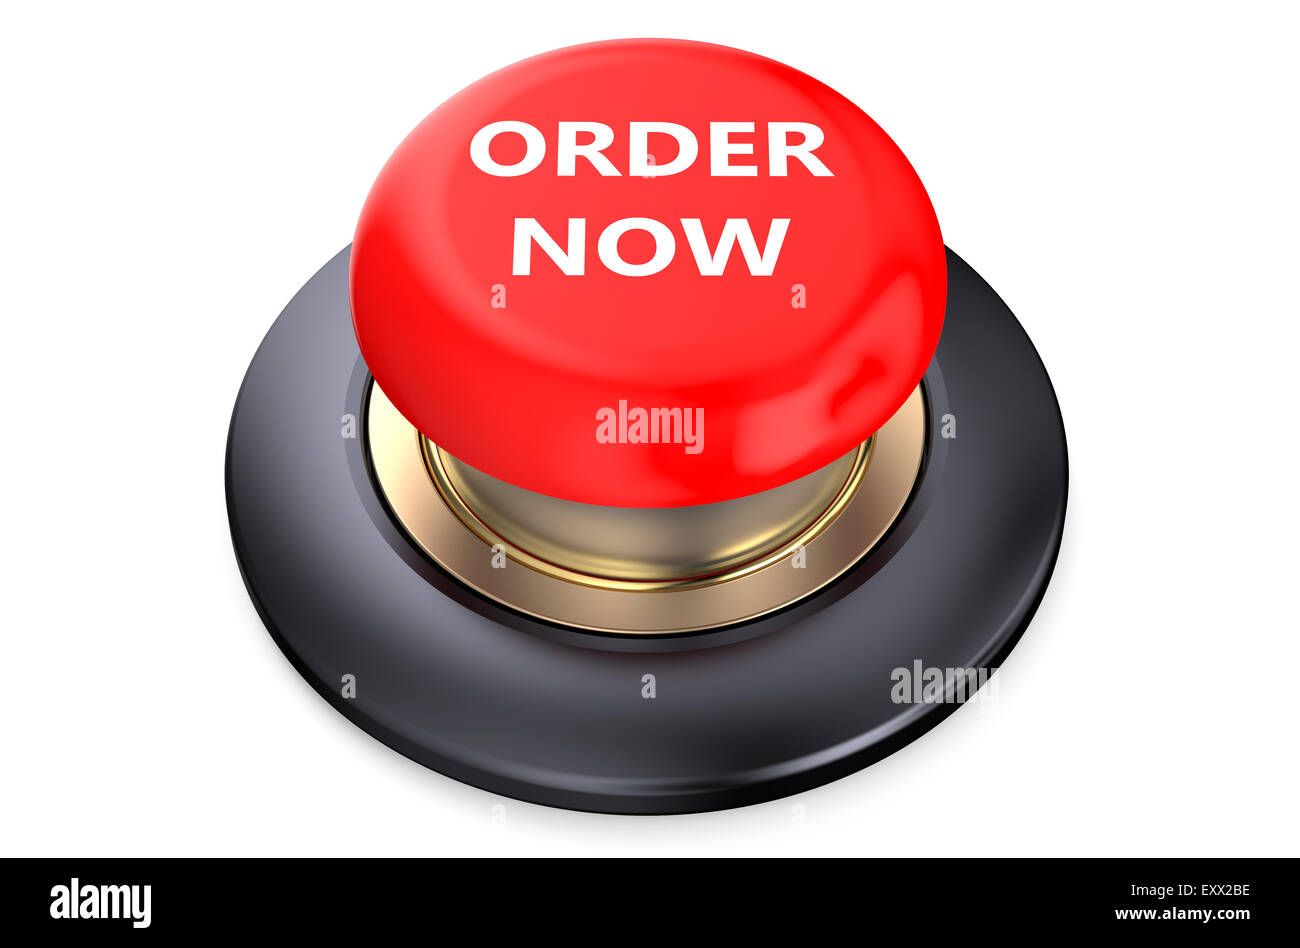 Order now Red button isolated on white background Stock Photo